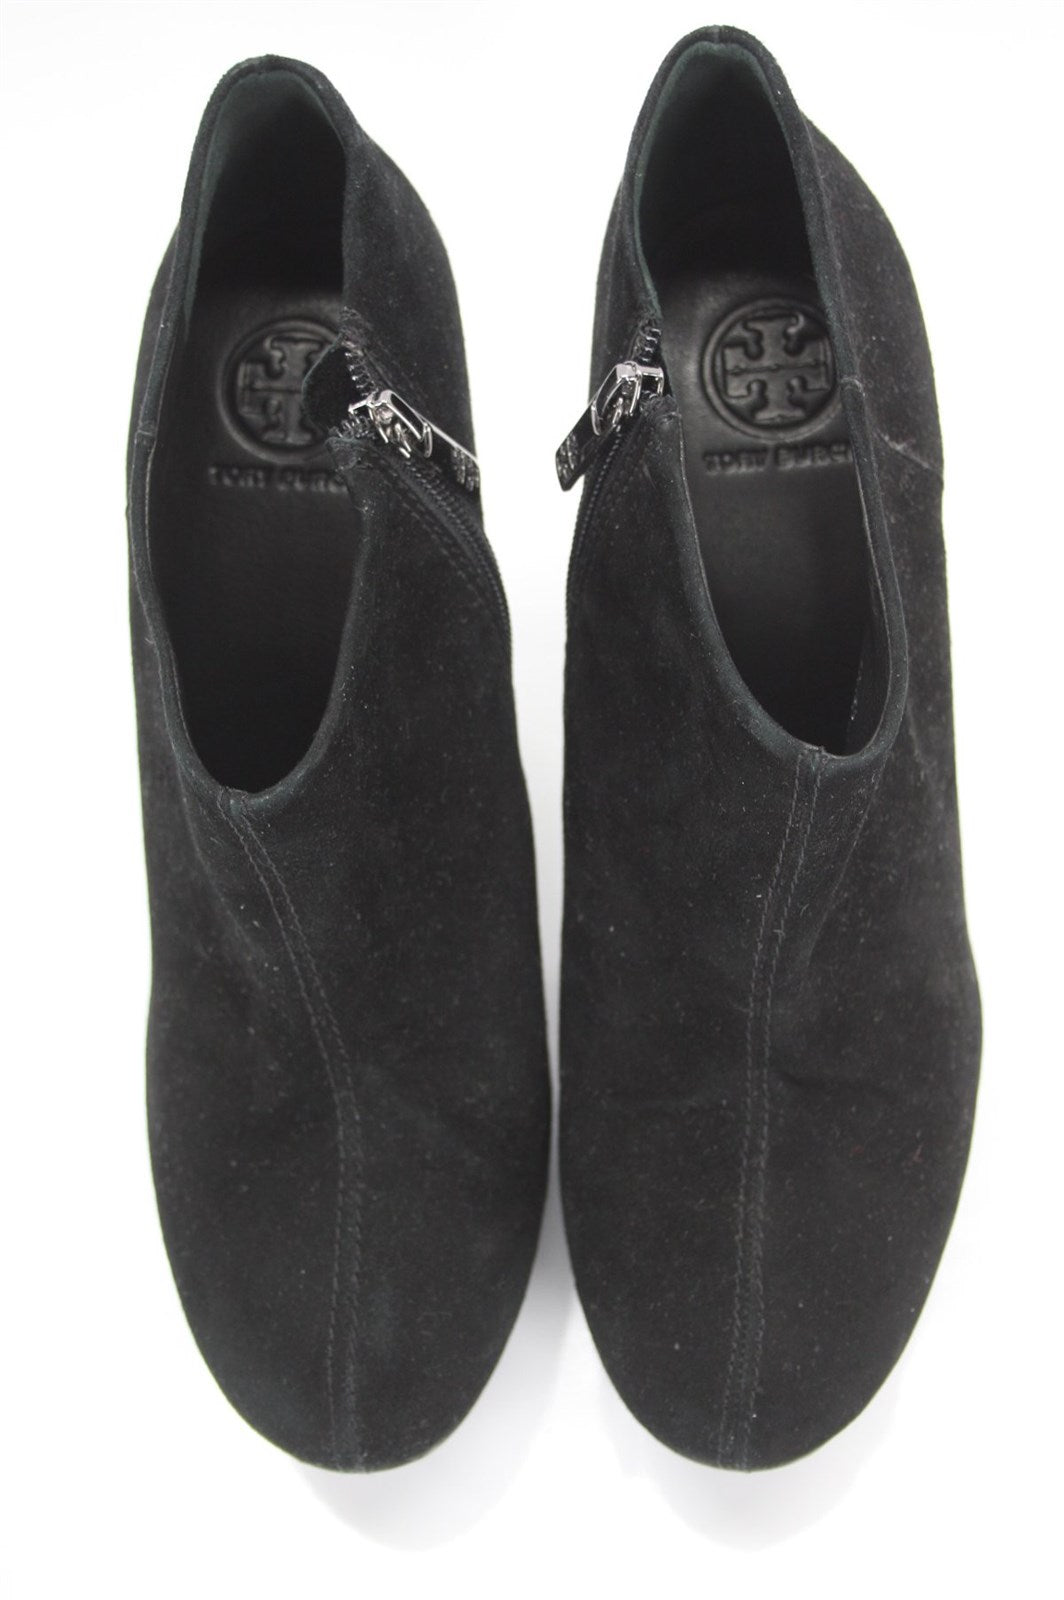 Tory Burch Cidnay Black Suede Platform Side Zip Ankle Boots SZ 10.5 New $495